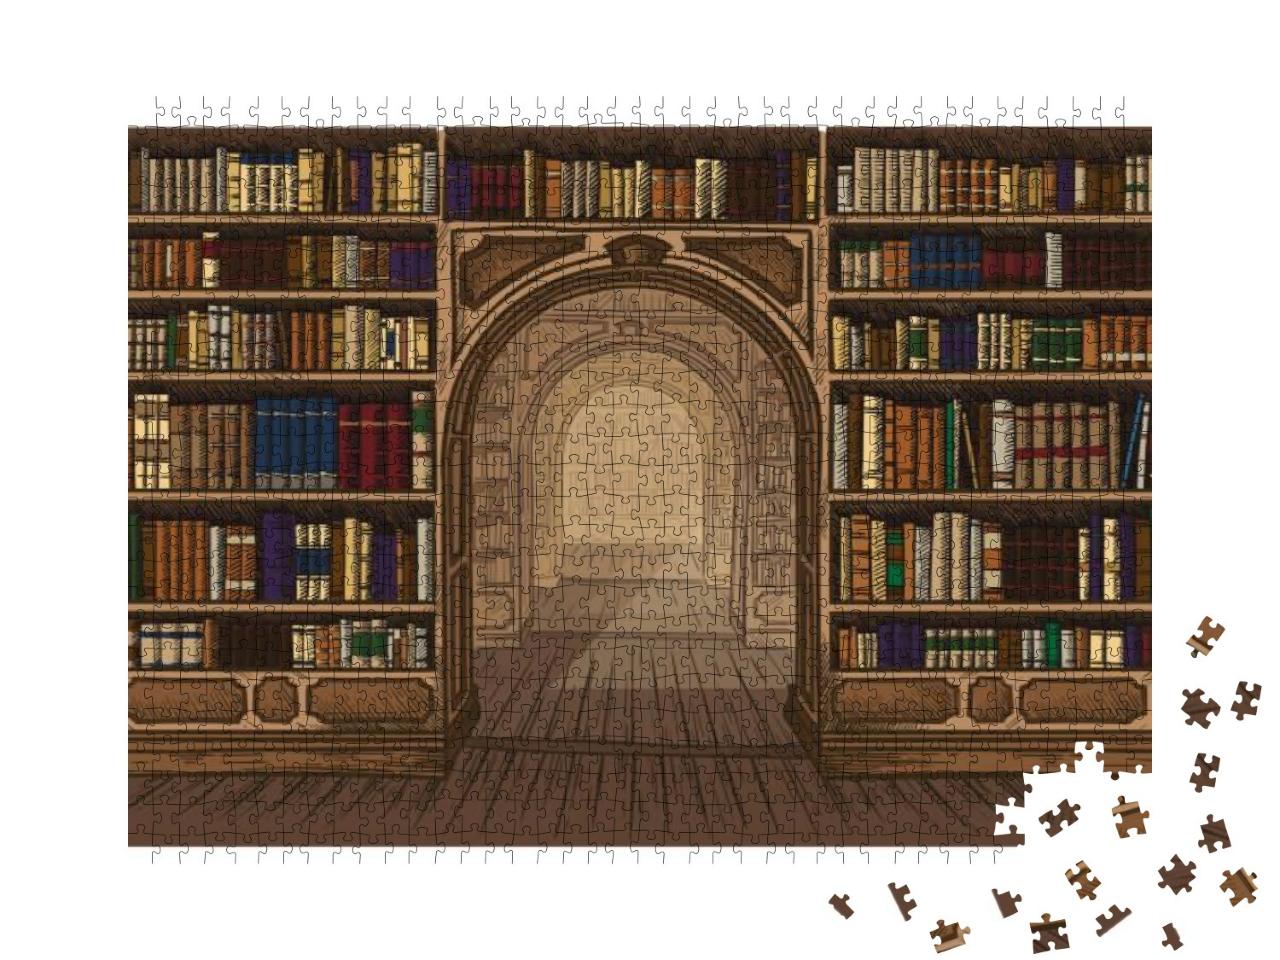 Library Book Shelf Interior Graphic Sketch Colorful Illus... Jigsaw Puzzle with 1000 pieces